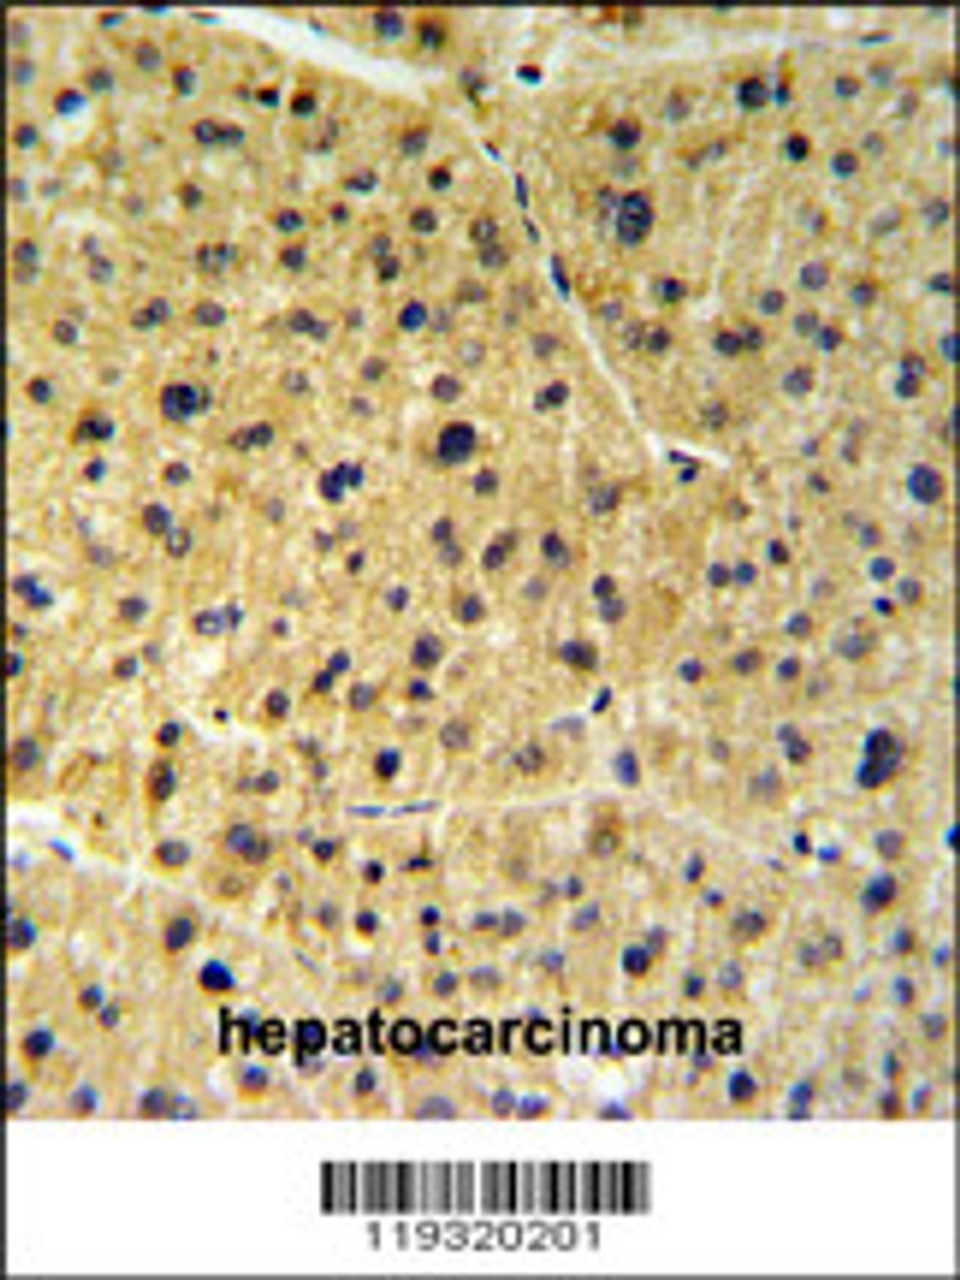 FKBP9 Antibody IHC analysis in formalin fixed and paraffin embedded human hepatocarcinoma followed by peroxidase conjugation of the secondary antibody and DAB staining.